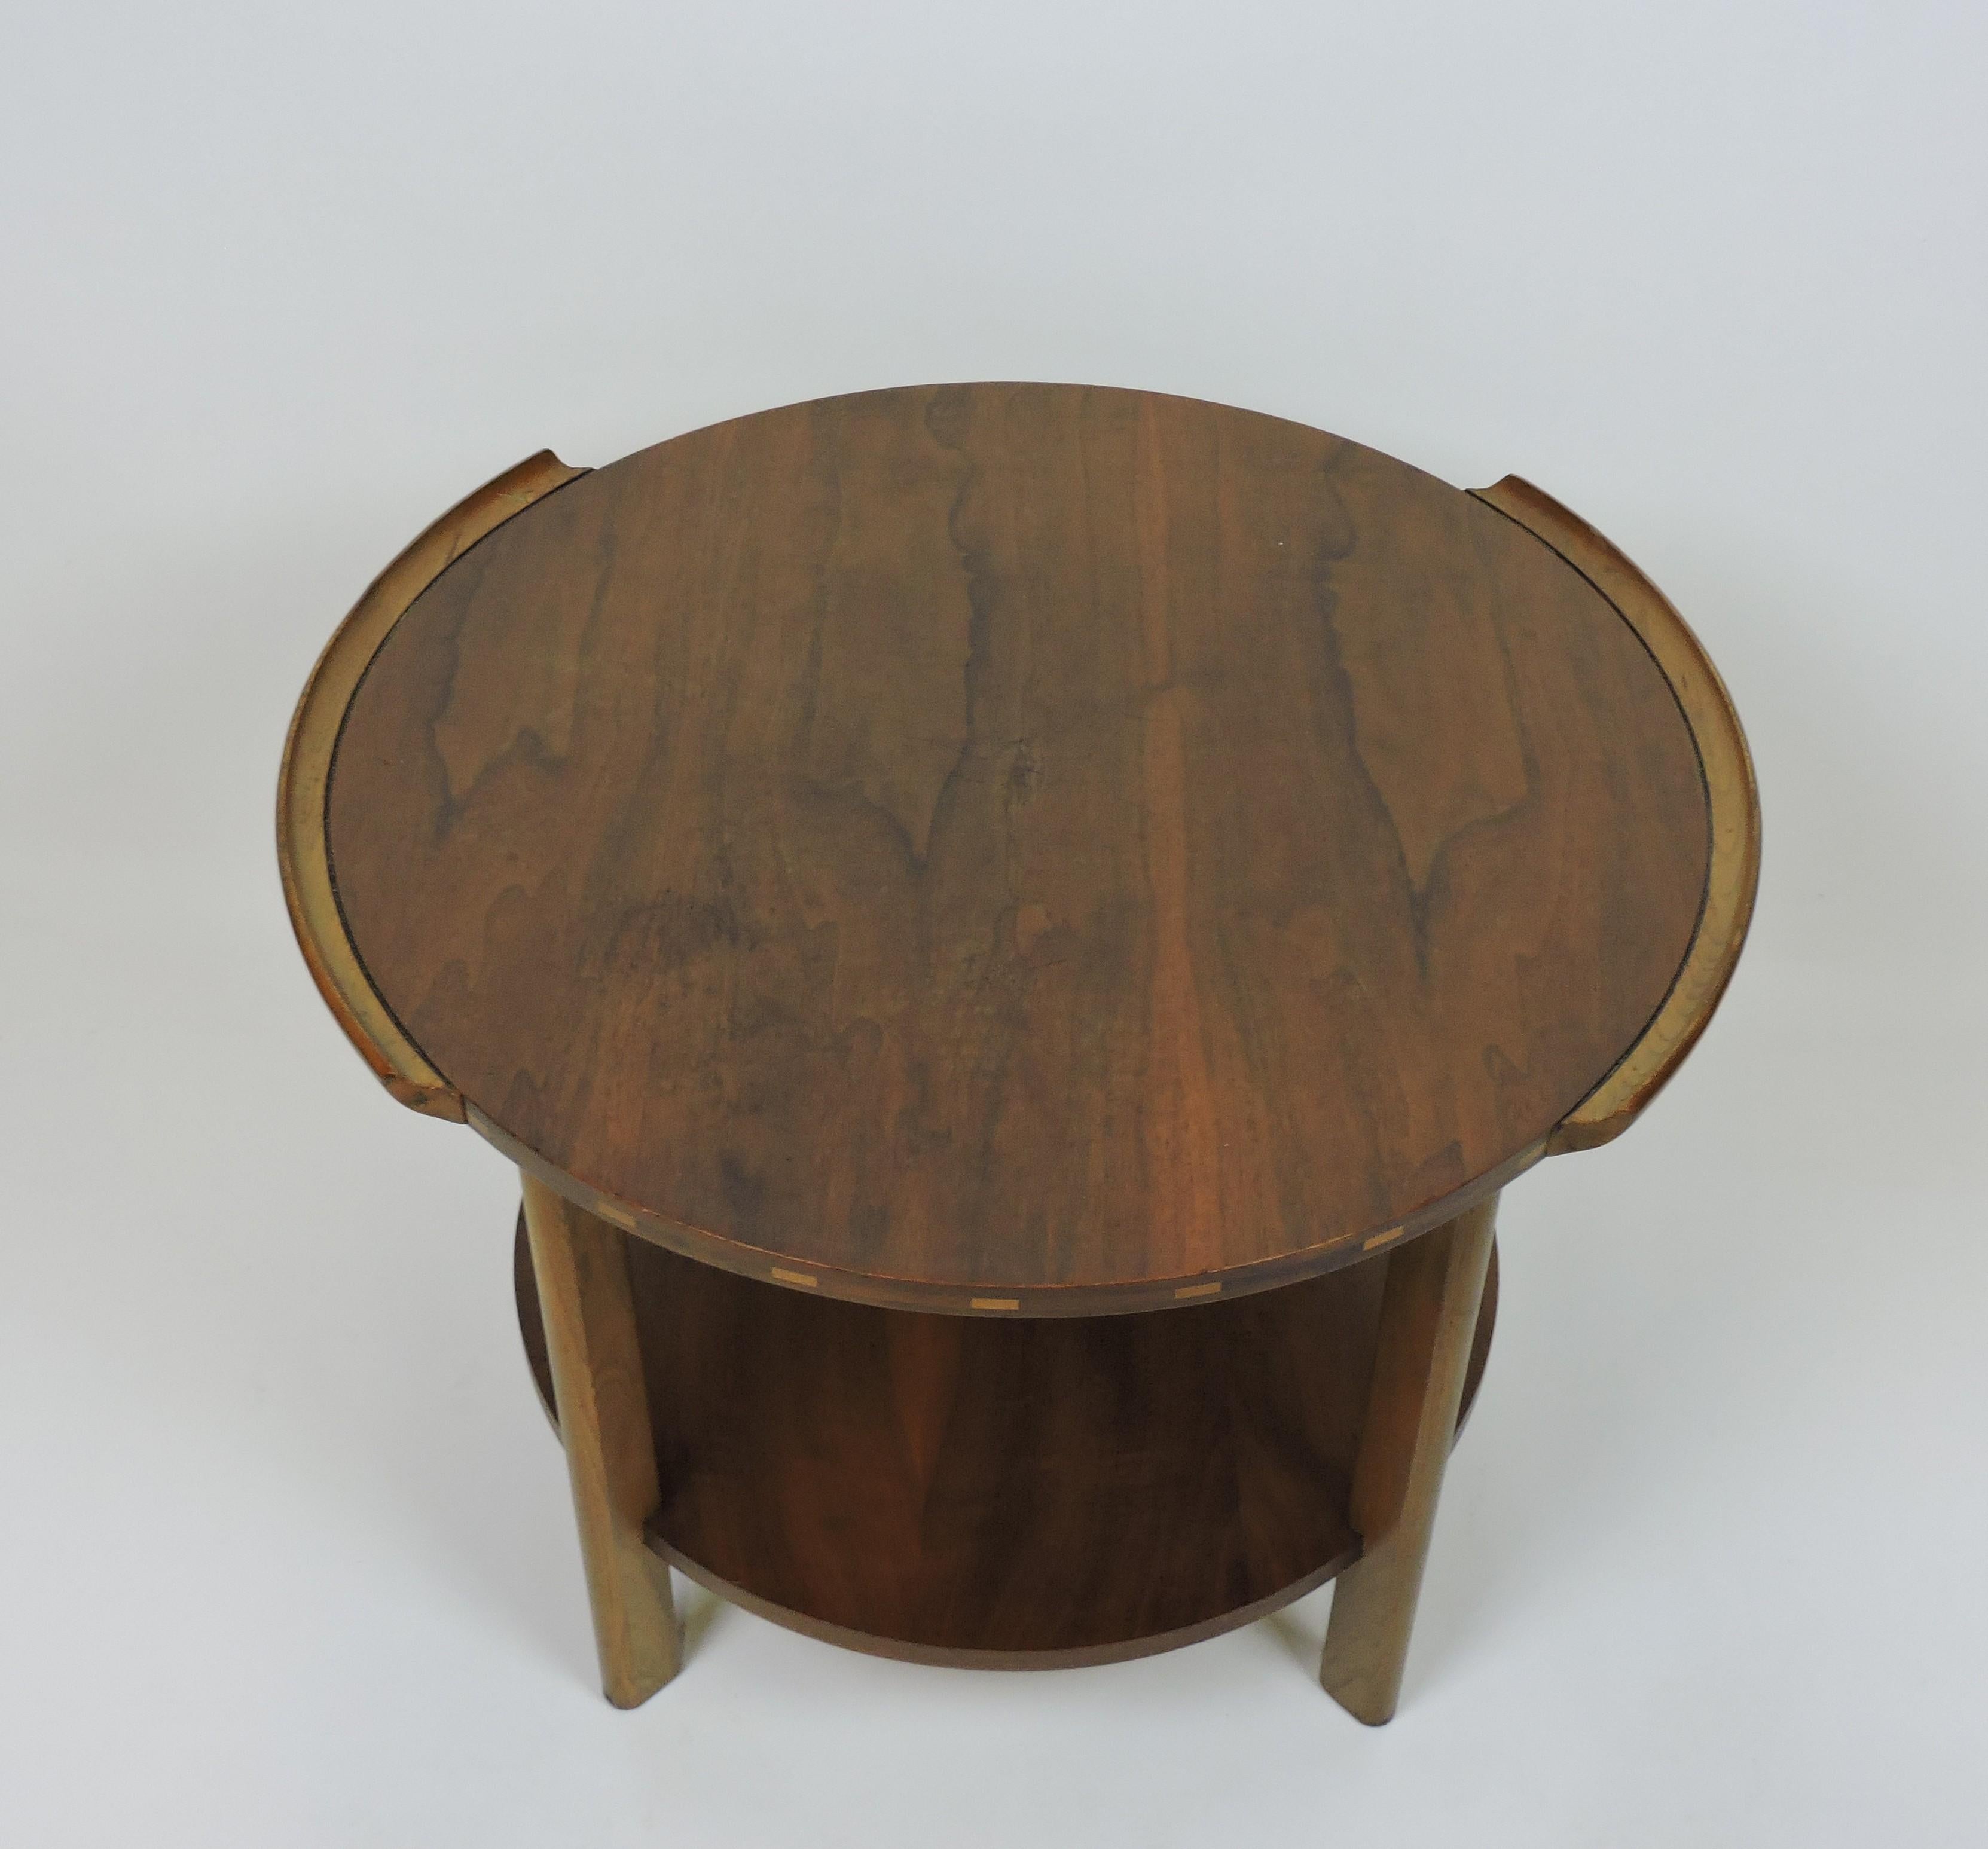 Attractive side or small coffee table manufactured by the Lane Furniture Company of Altavista, Virginia as part of their Vogue series. This two tiered table has an Asian influenced style with its two raised edges and contrasting wood inlays on the